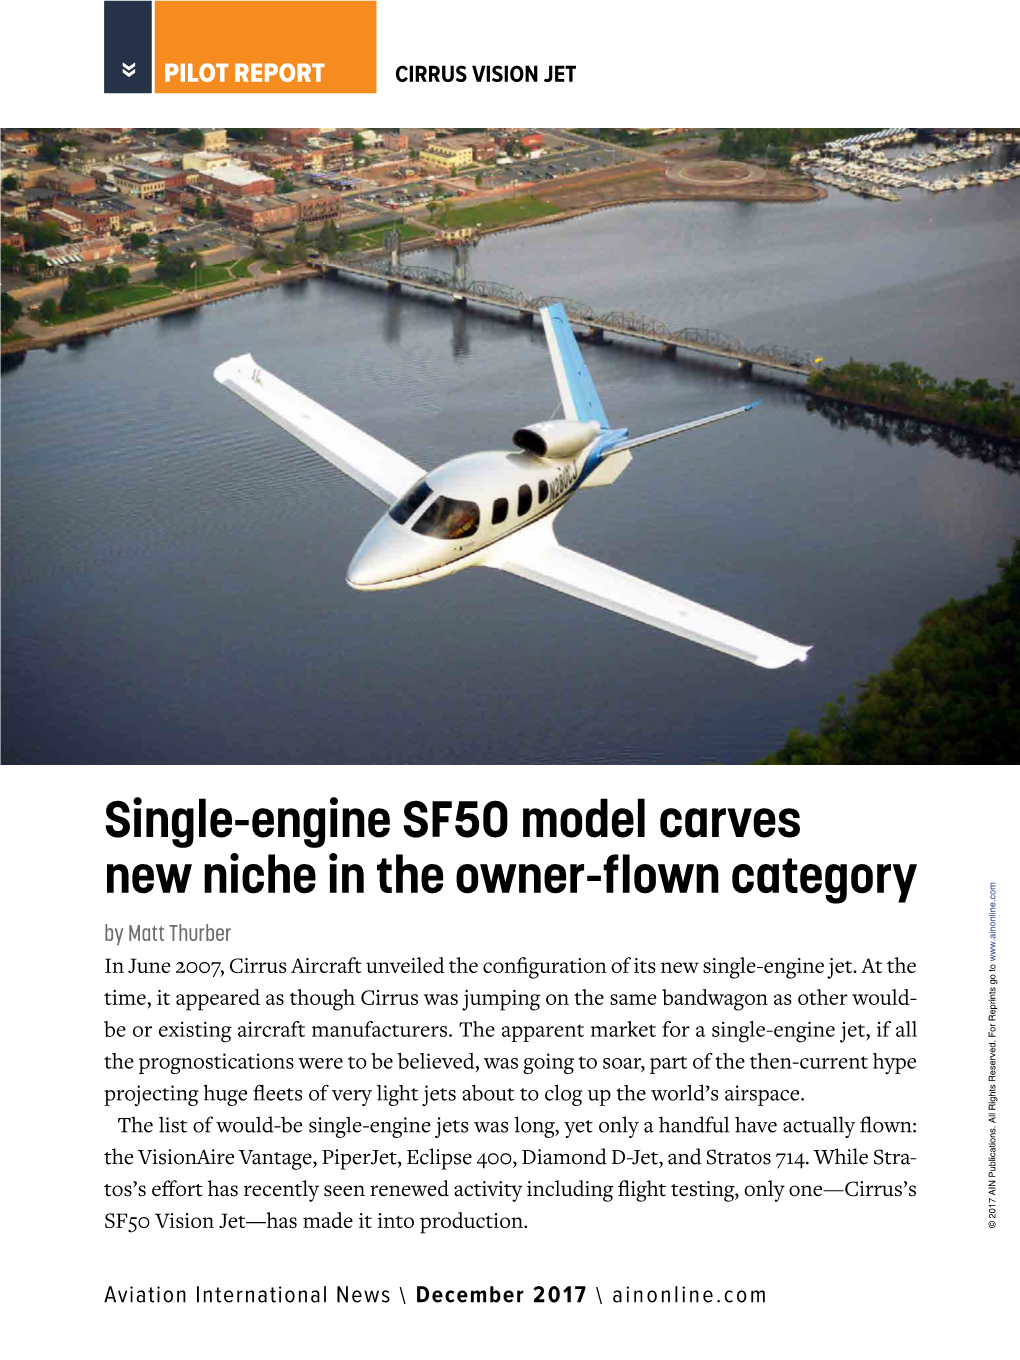 Single-Engine SF50 Model Carves New Niche in the Owner-Flown